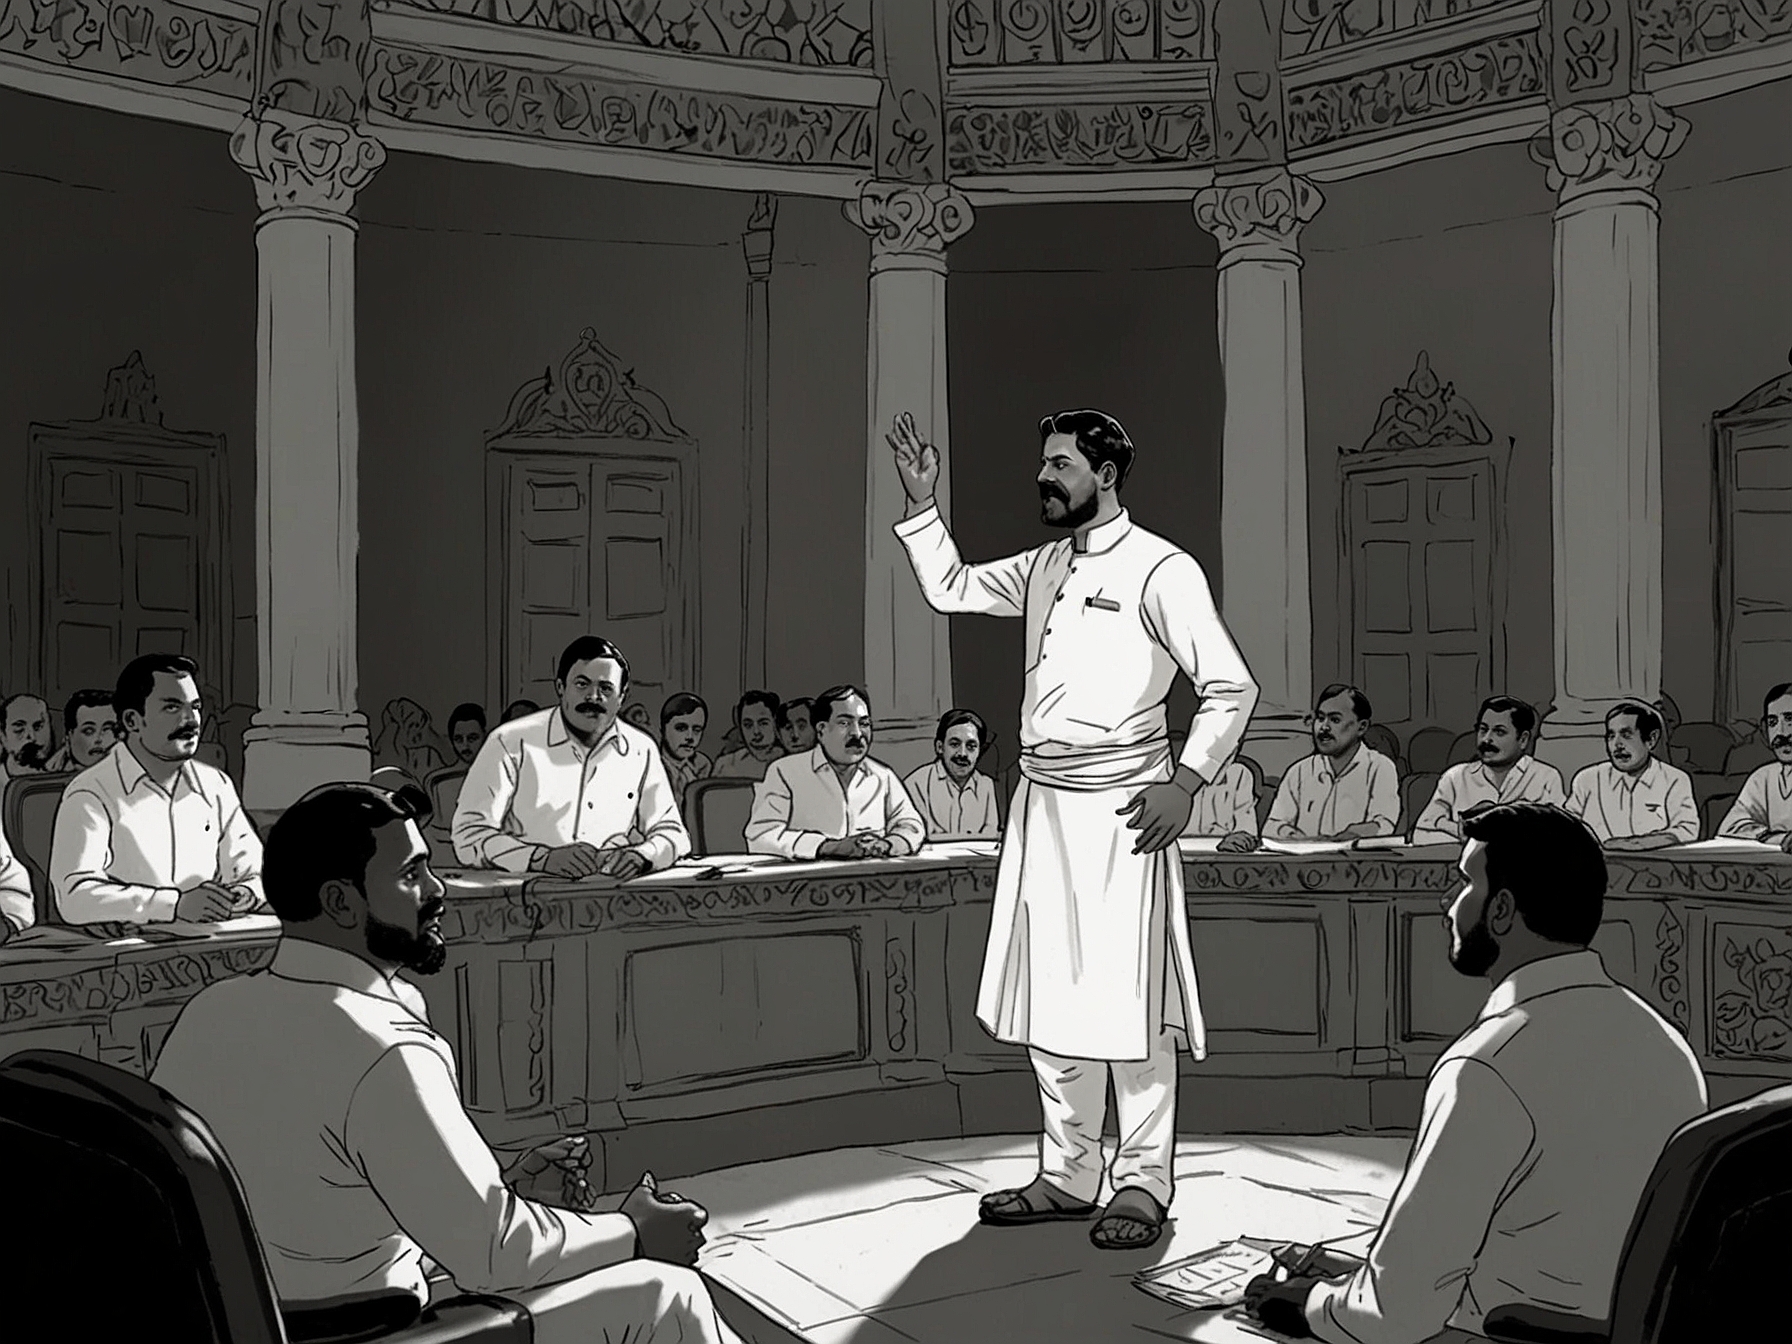 The Speaker of the House intervenes to maintain order during Chandrashekhar Azad's impassioned address, with members of parliament watching the heated exchange closely.